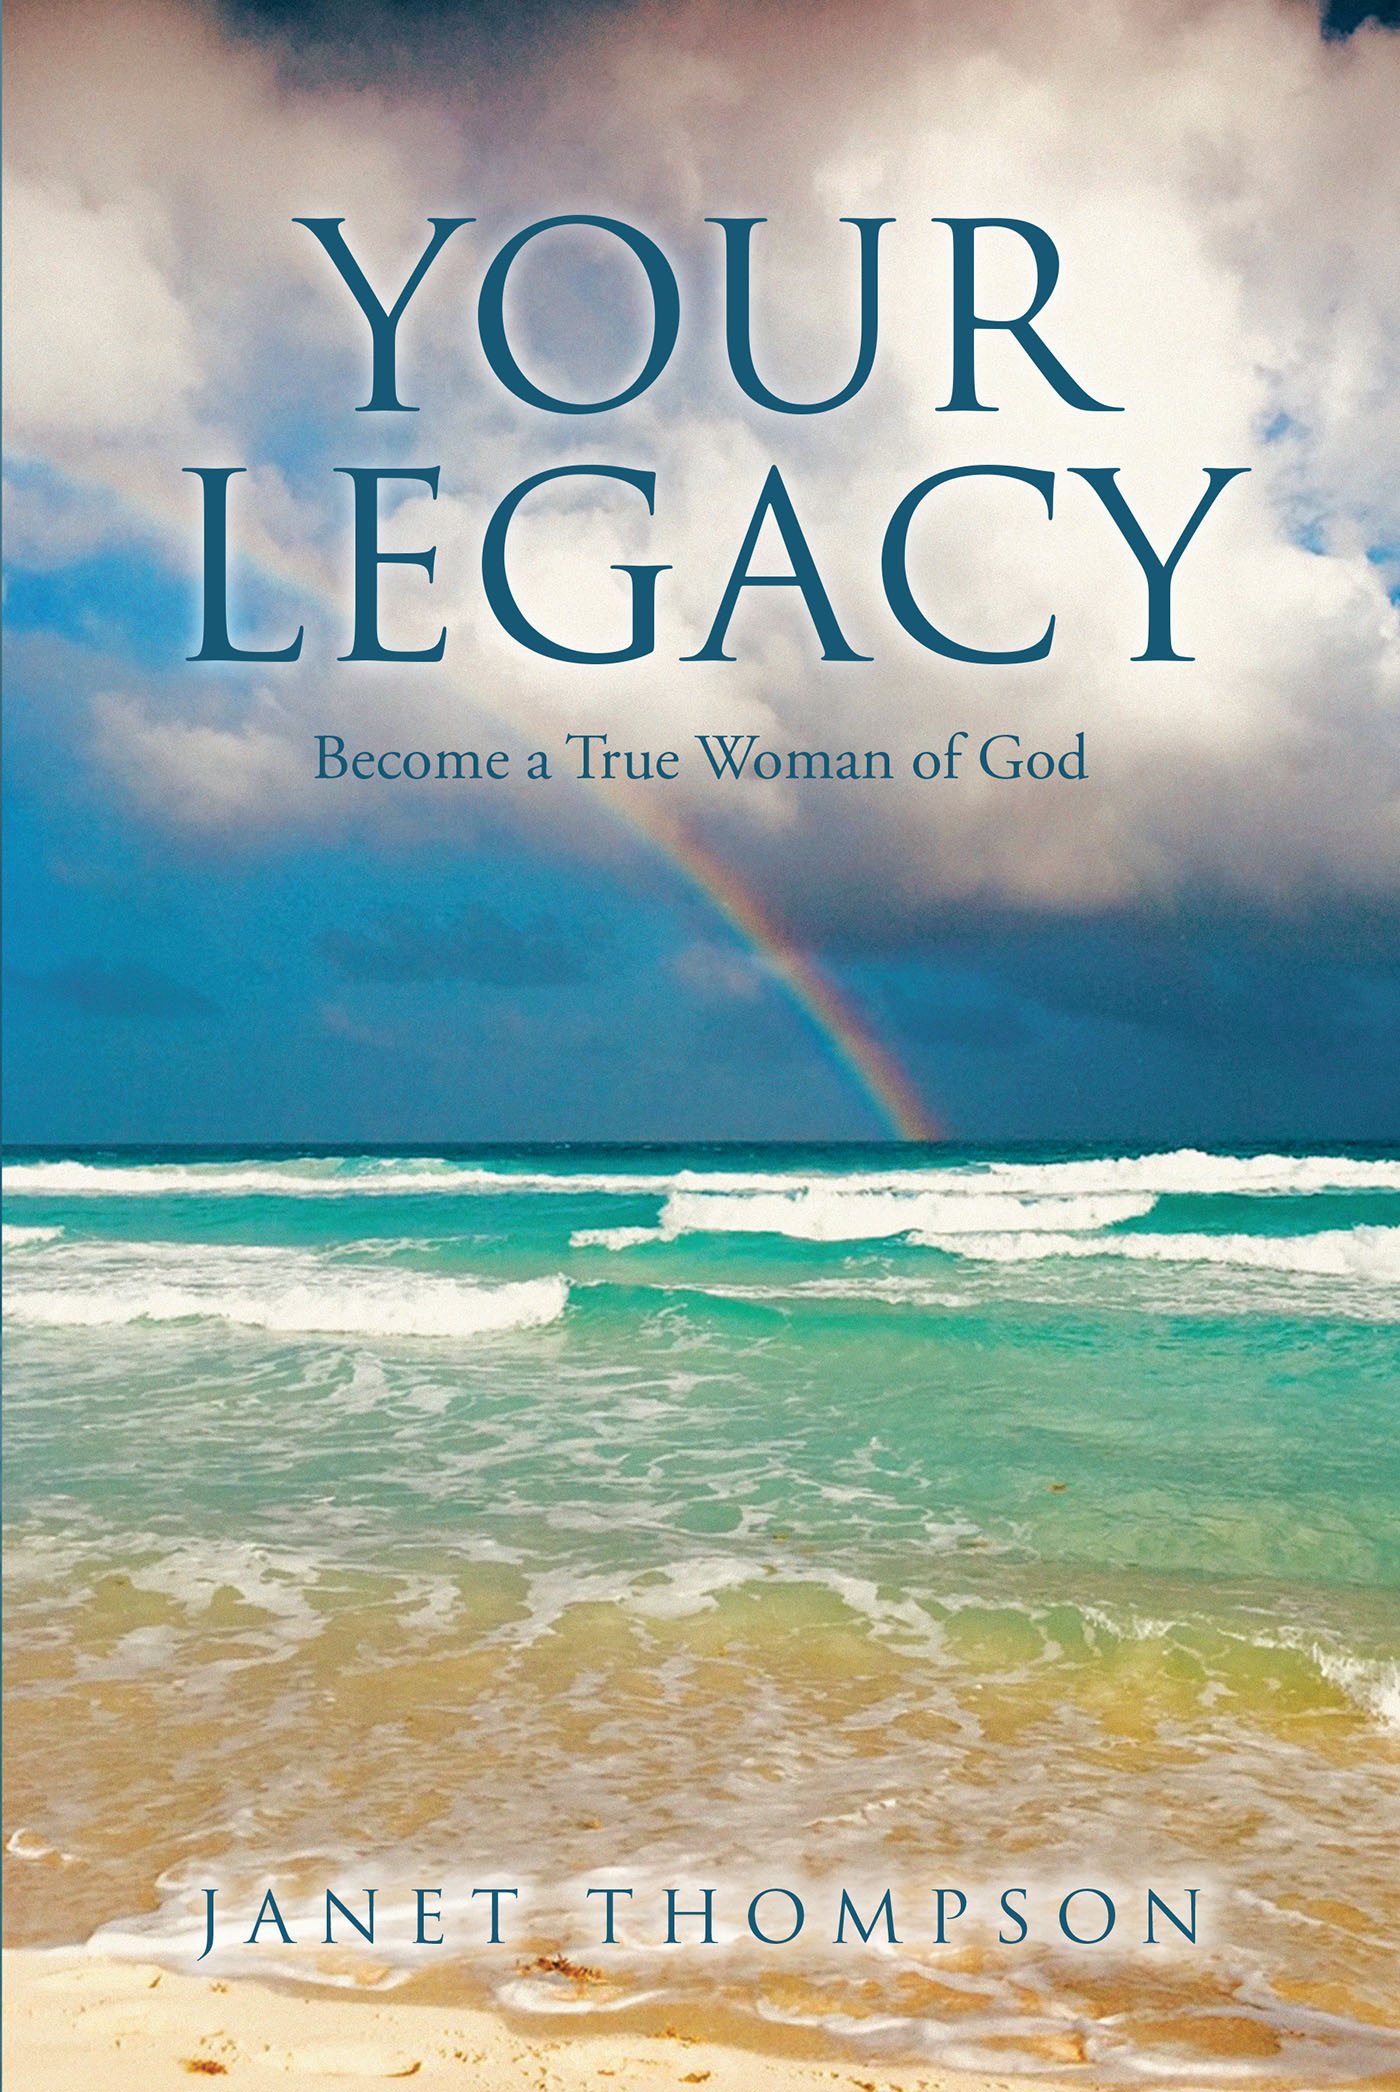 Author Janet Thompson’s New Book, "Your Legacy: Become a True Woman of God," Reveals the Incredible and Rewarding Process to Starting a New Life with Christ